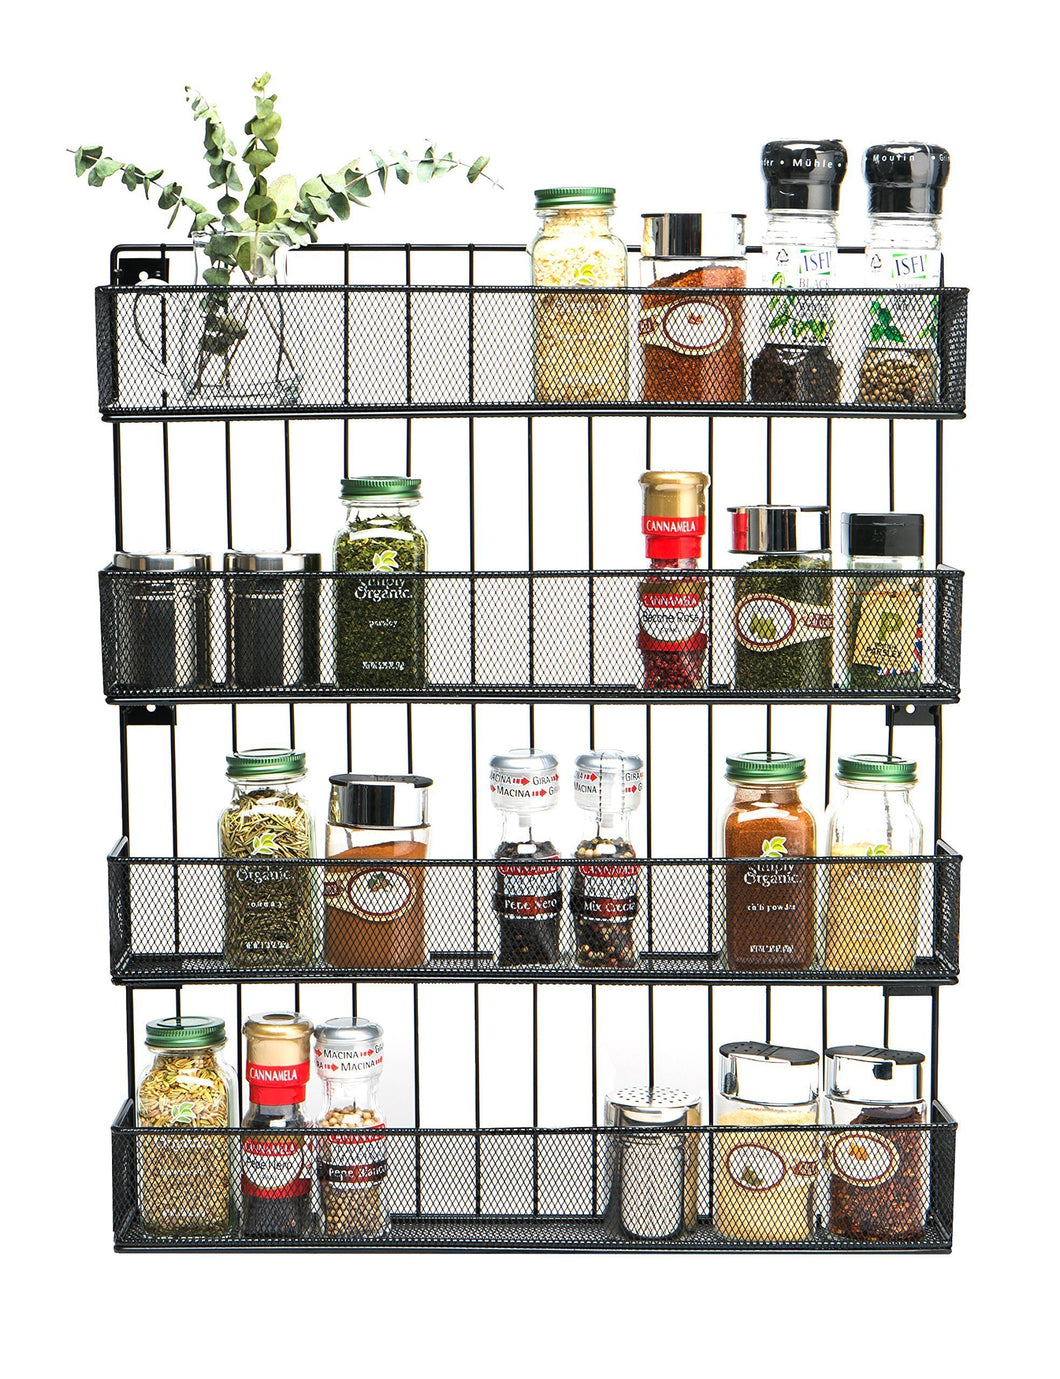 JackCubeDesign Wall Mount Spice Rack 4 tier Kitchen Countertop Worktop Display Organizer Spice Bottles Holder Stand Shelves(17.6 x 2.8 x 20.8 inches) - :MK418A - Productive Organizing